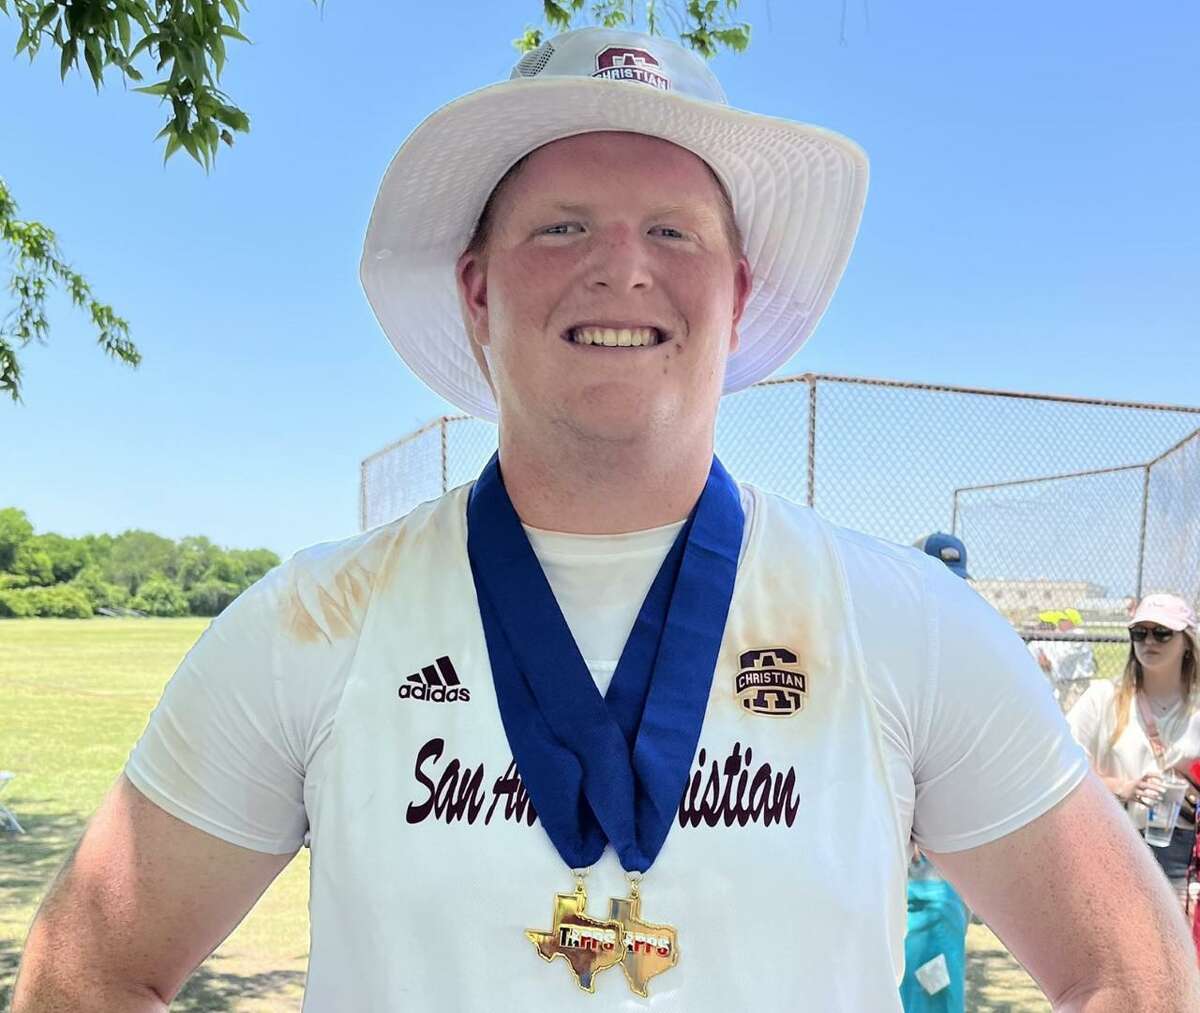 San Antonio Christian senior Ethan Sanders poses with gold medals for winning the TAPPS Class 6A state championships in the shot put and discus on Friday, May, 6, 2022 at Waco Midway High School. He set meet records in both events.